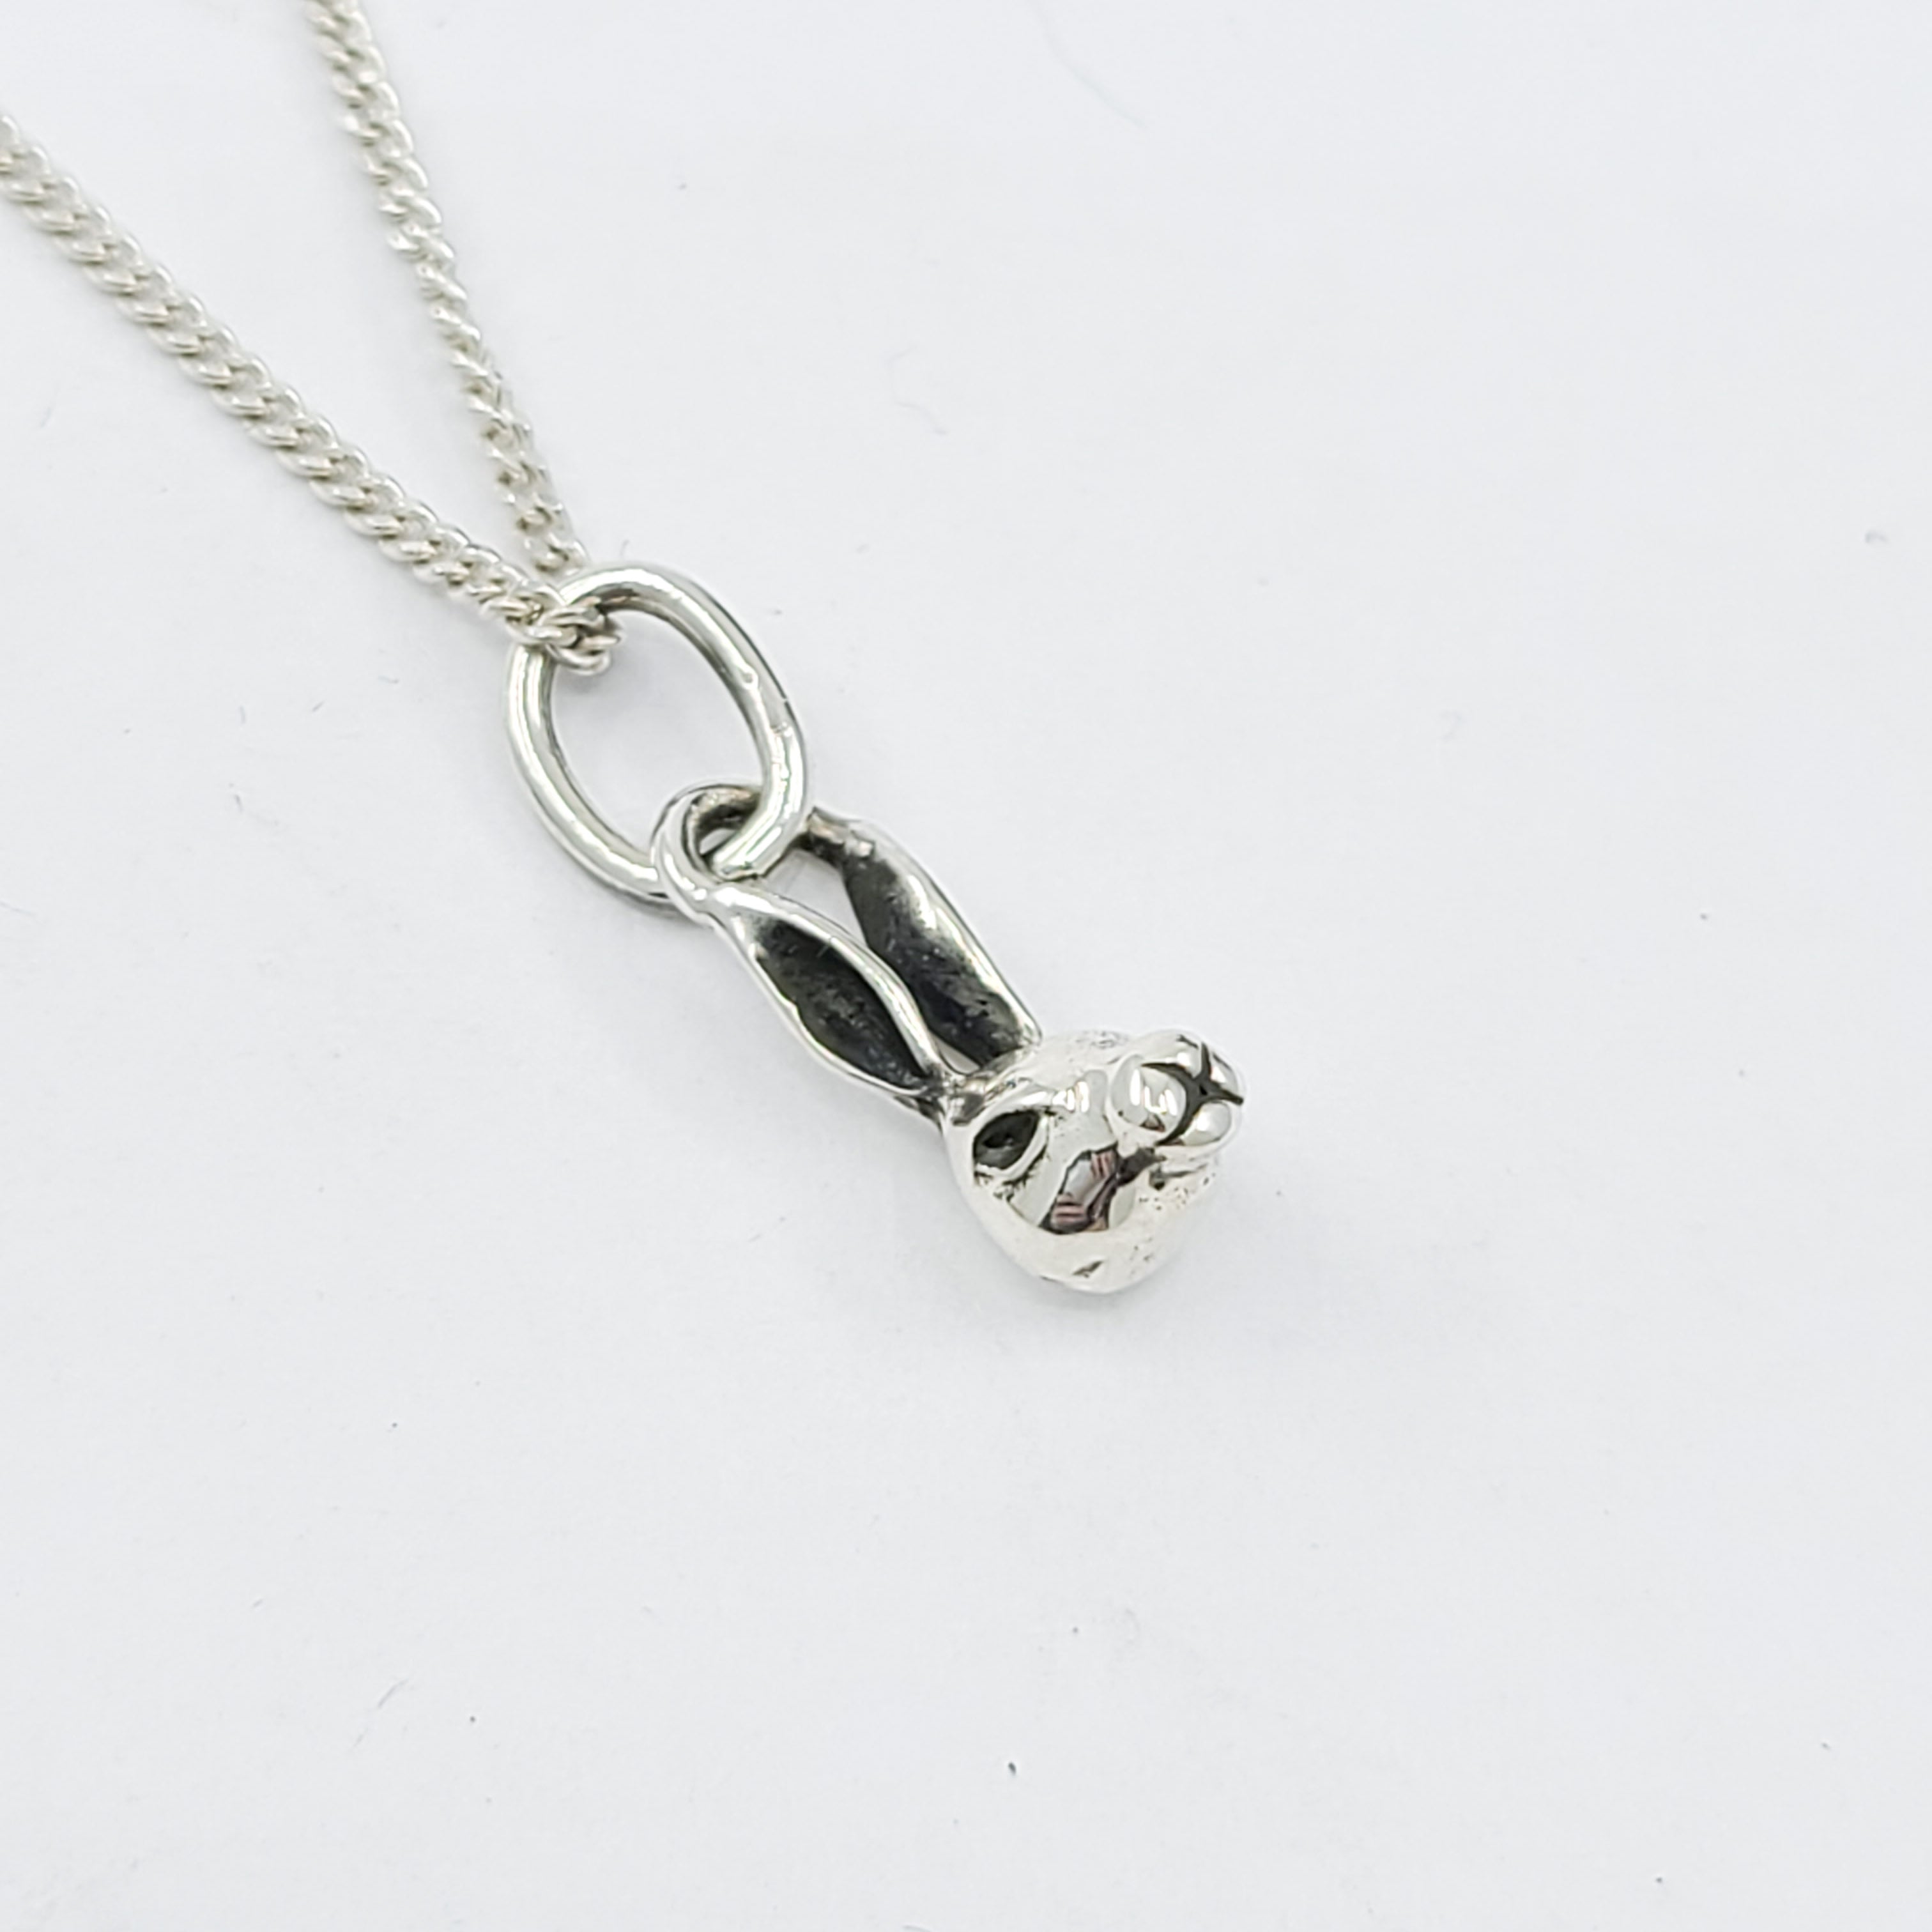 Tiny Little Rabbit Pendant Necklace in Sterling Silver, Silver Rabbit Necklace, Silver Hare Necklace